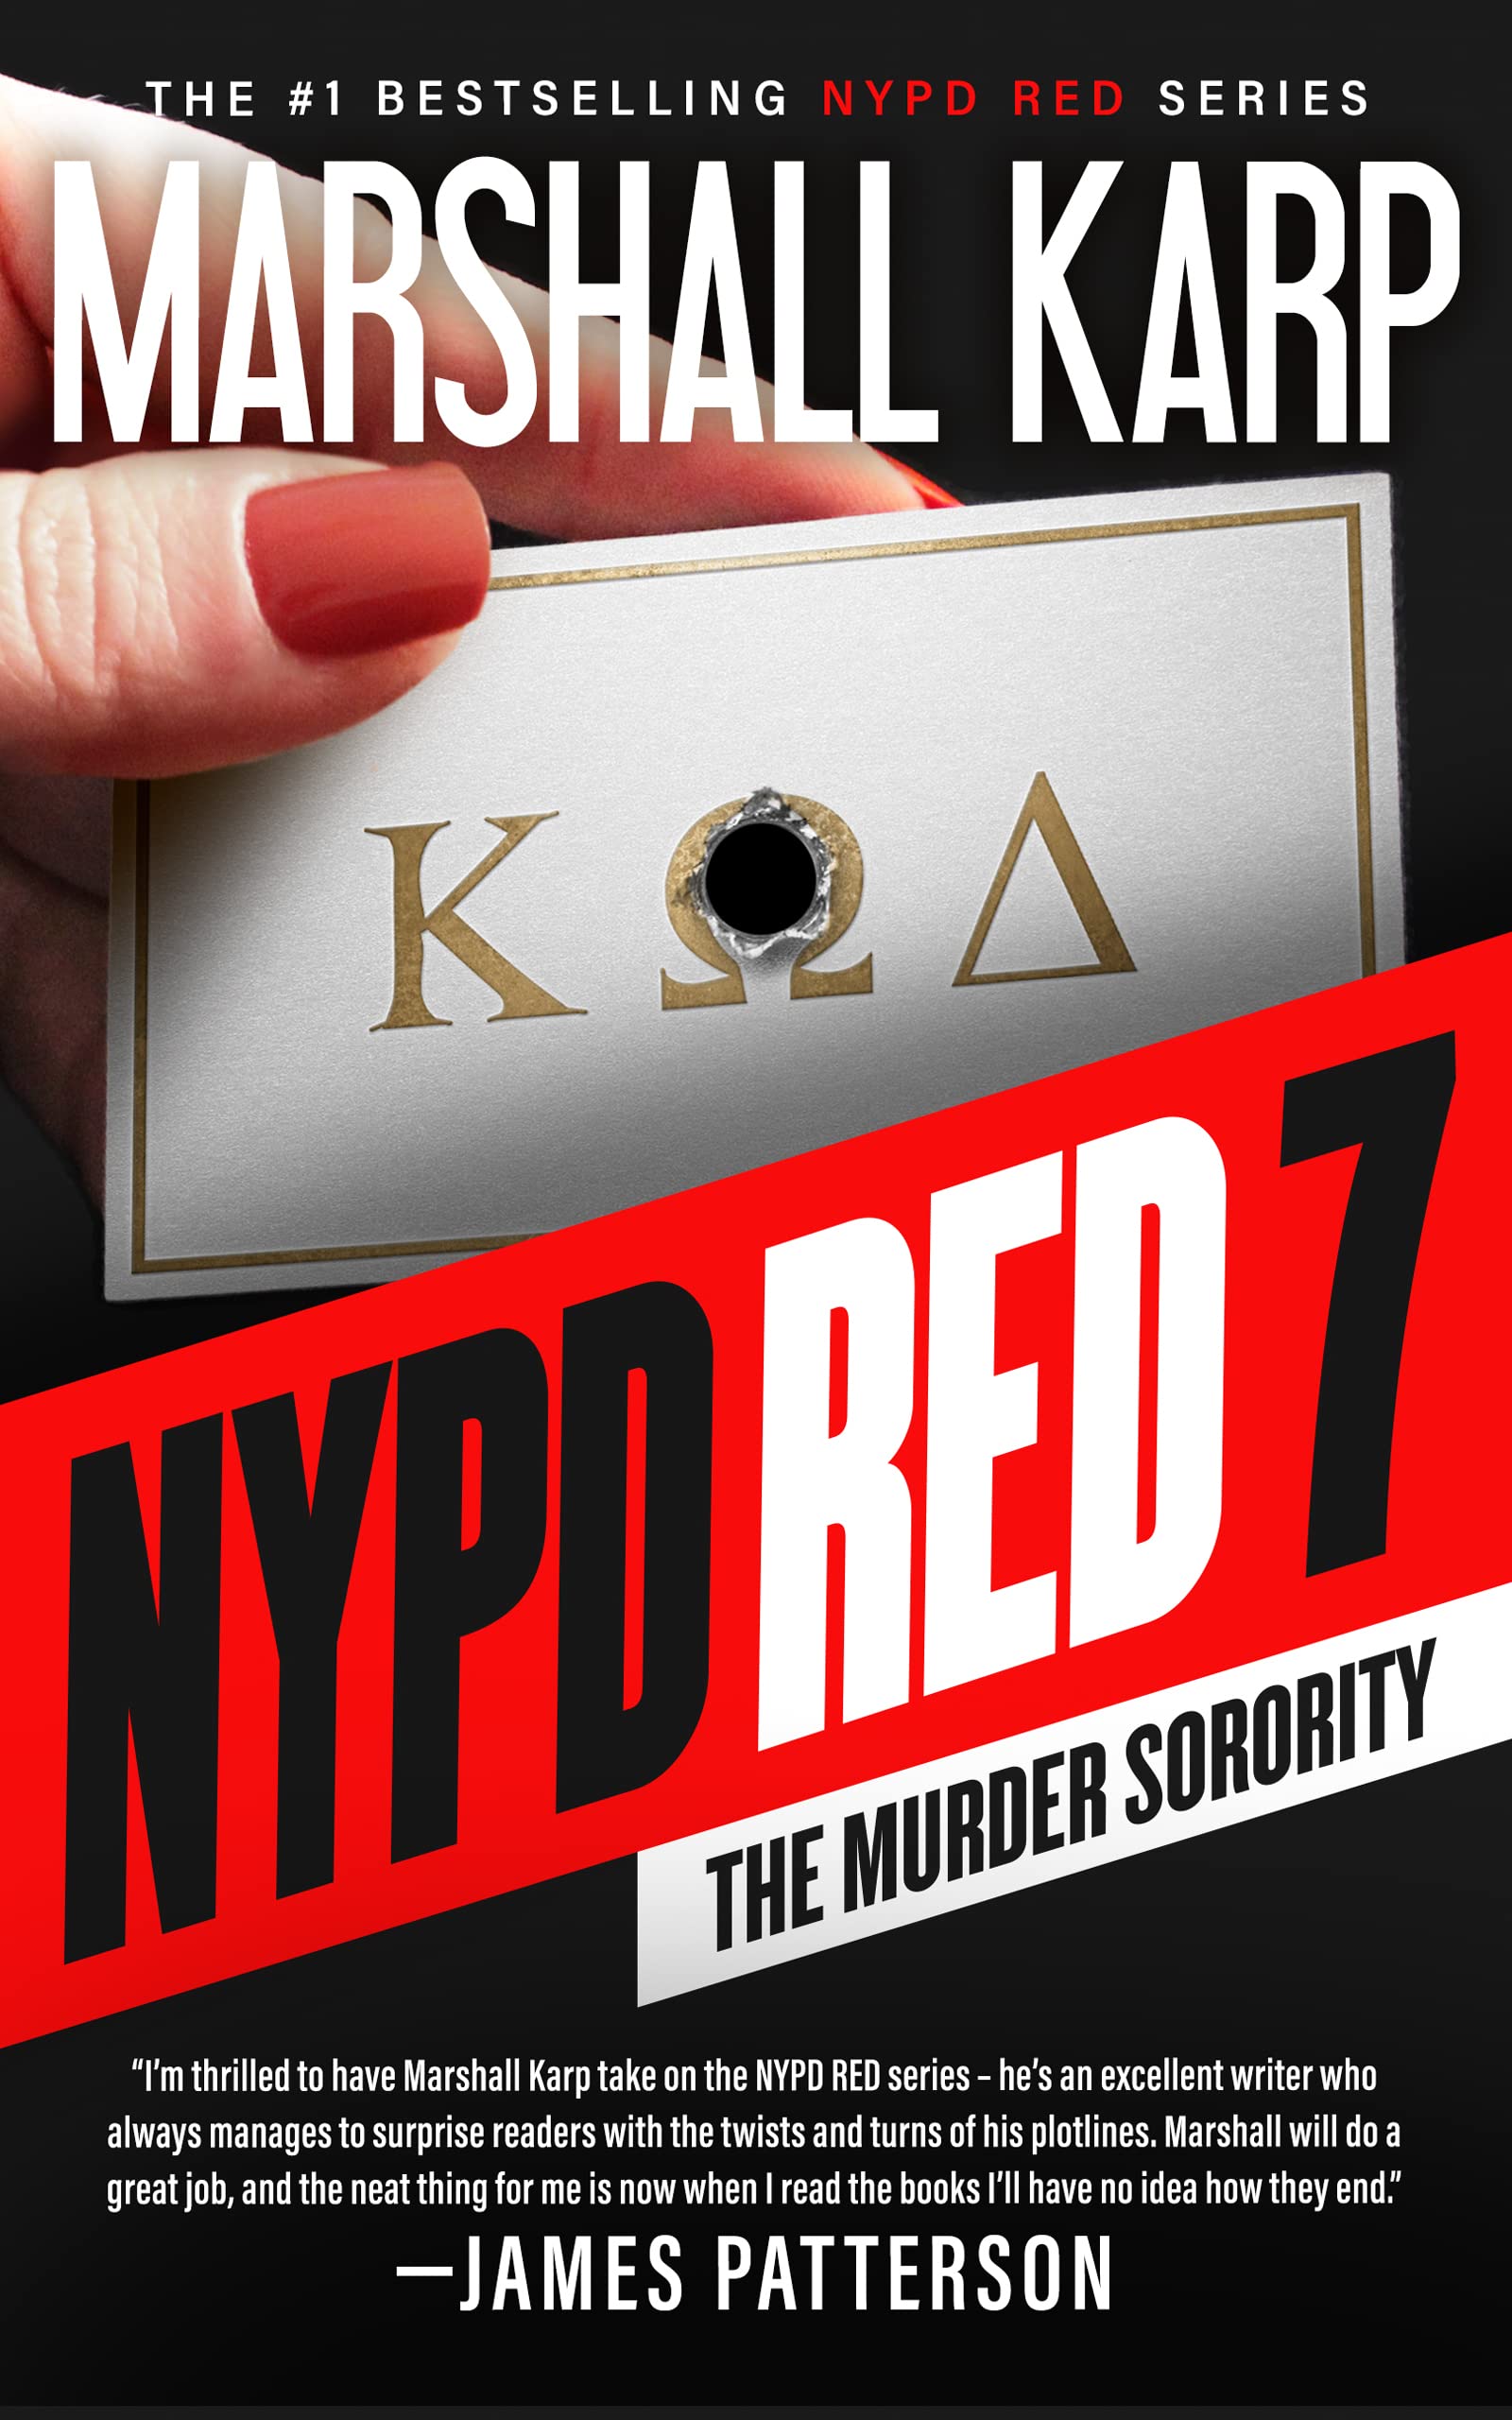 Image for "NYPD Red 7: The Murder Sorority"